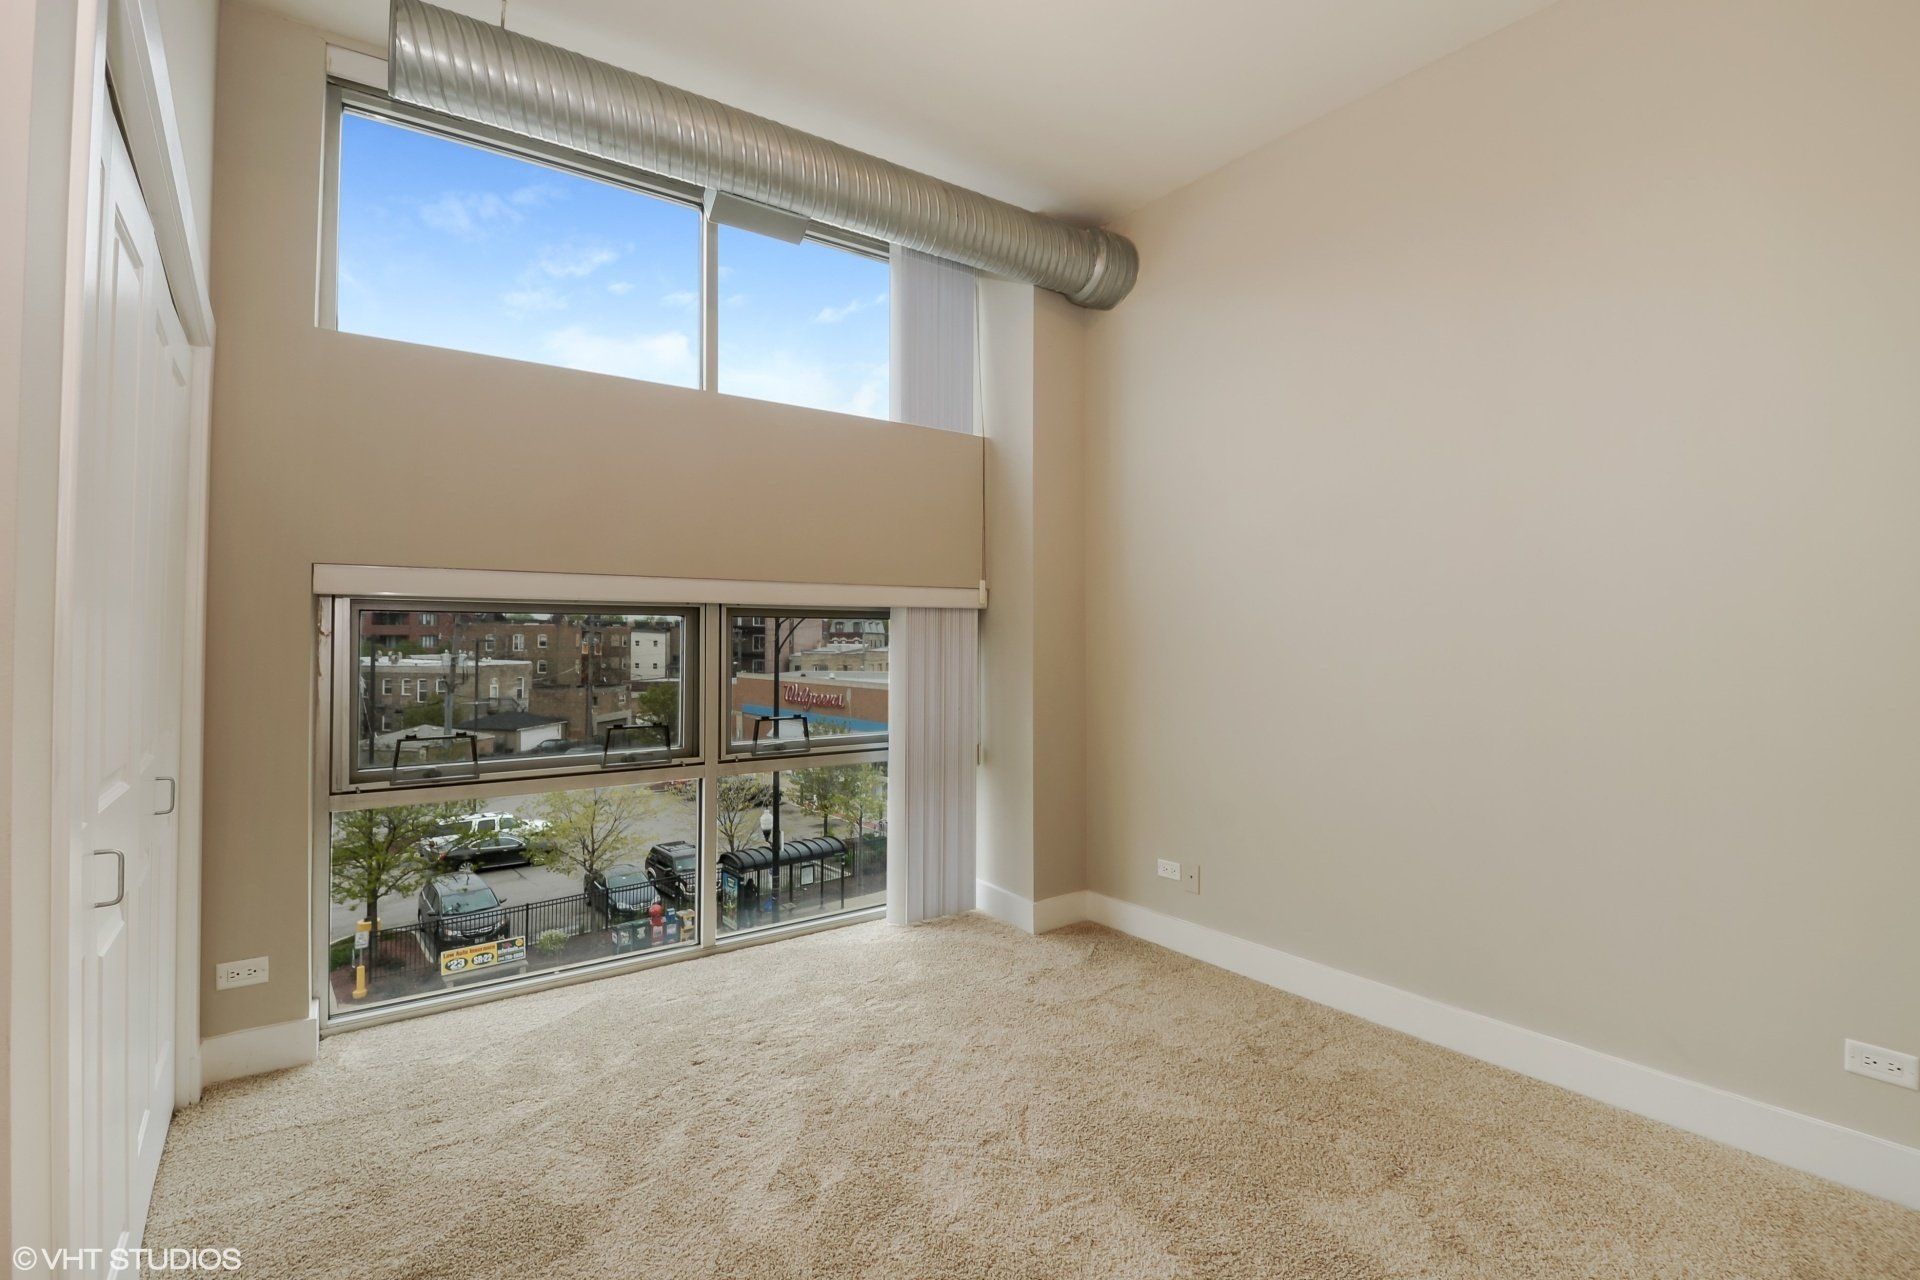 An empty room with a large window and a balcony at 2000 N Milwaukee Apartments.